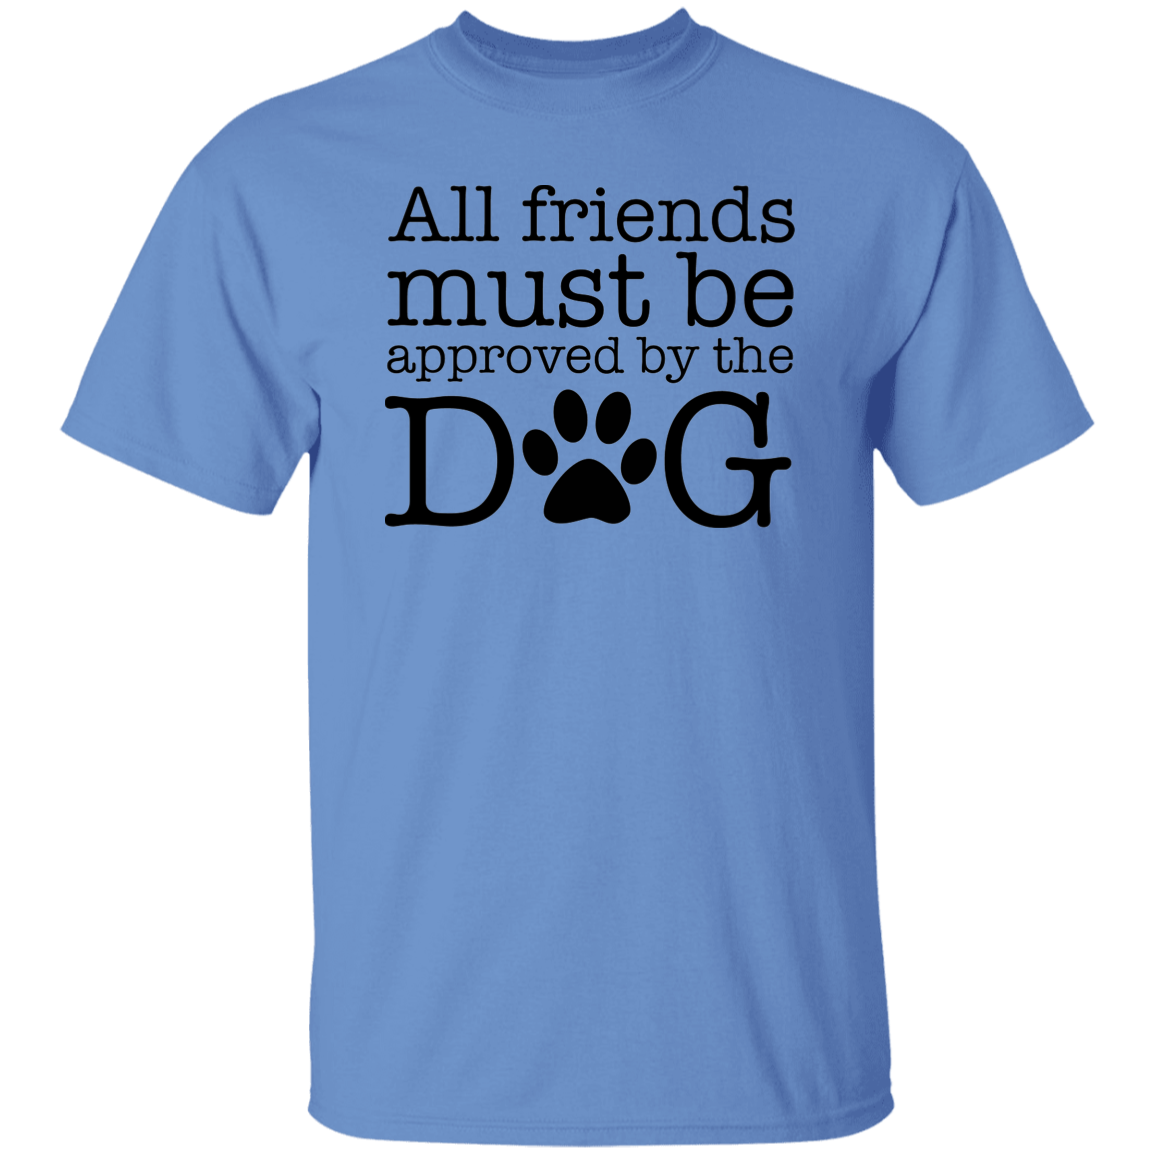 All My Friends Must Be Approved by the Dog T-Shirt